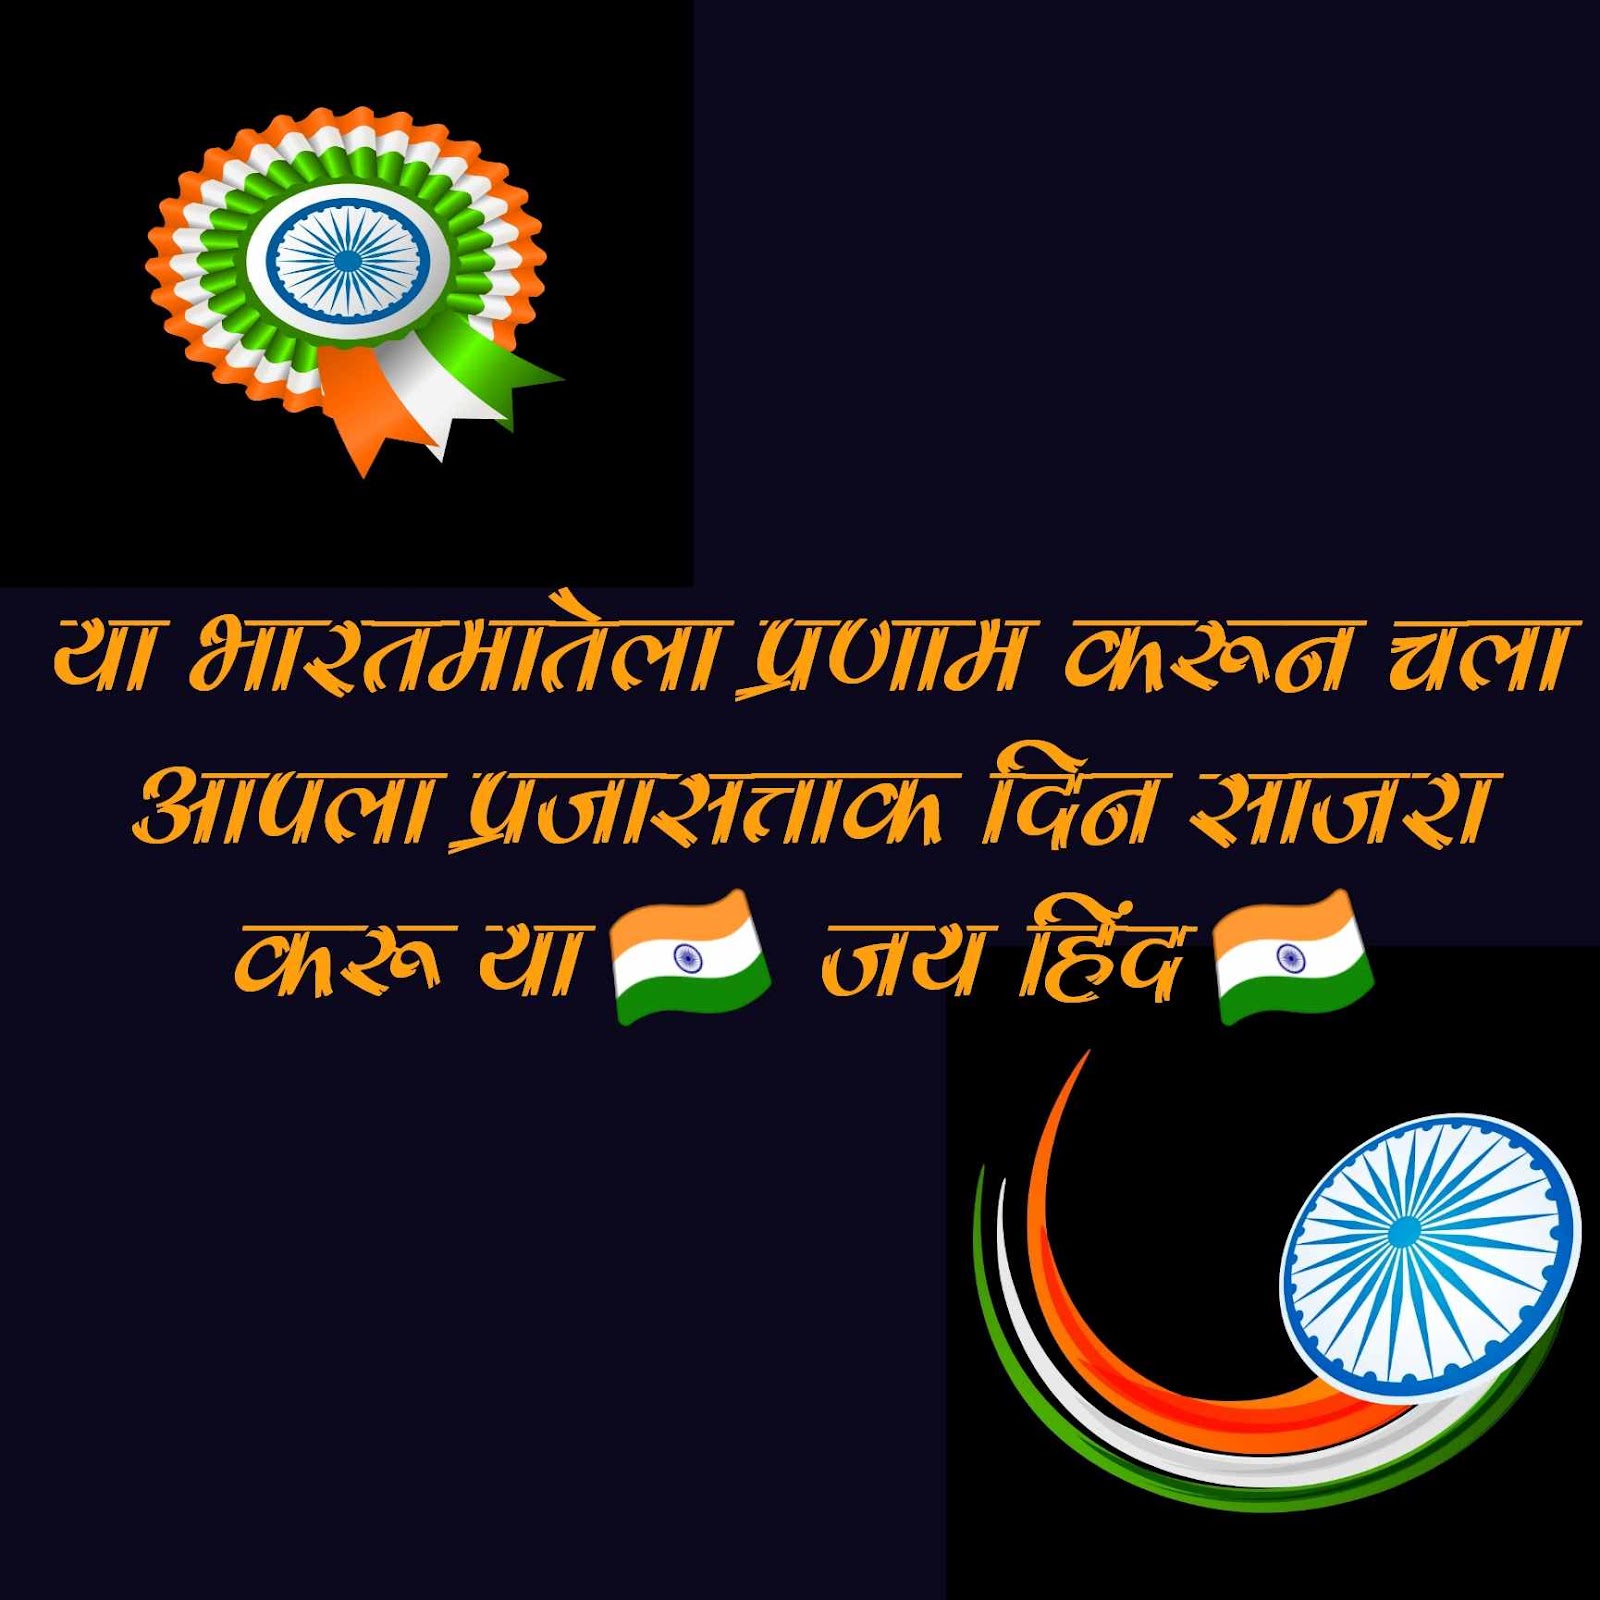 Republic day wishes Images , Republic day Quotes in Marathi, Image republic day Quotes Marathi